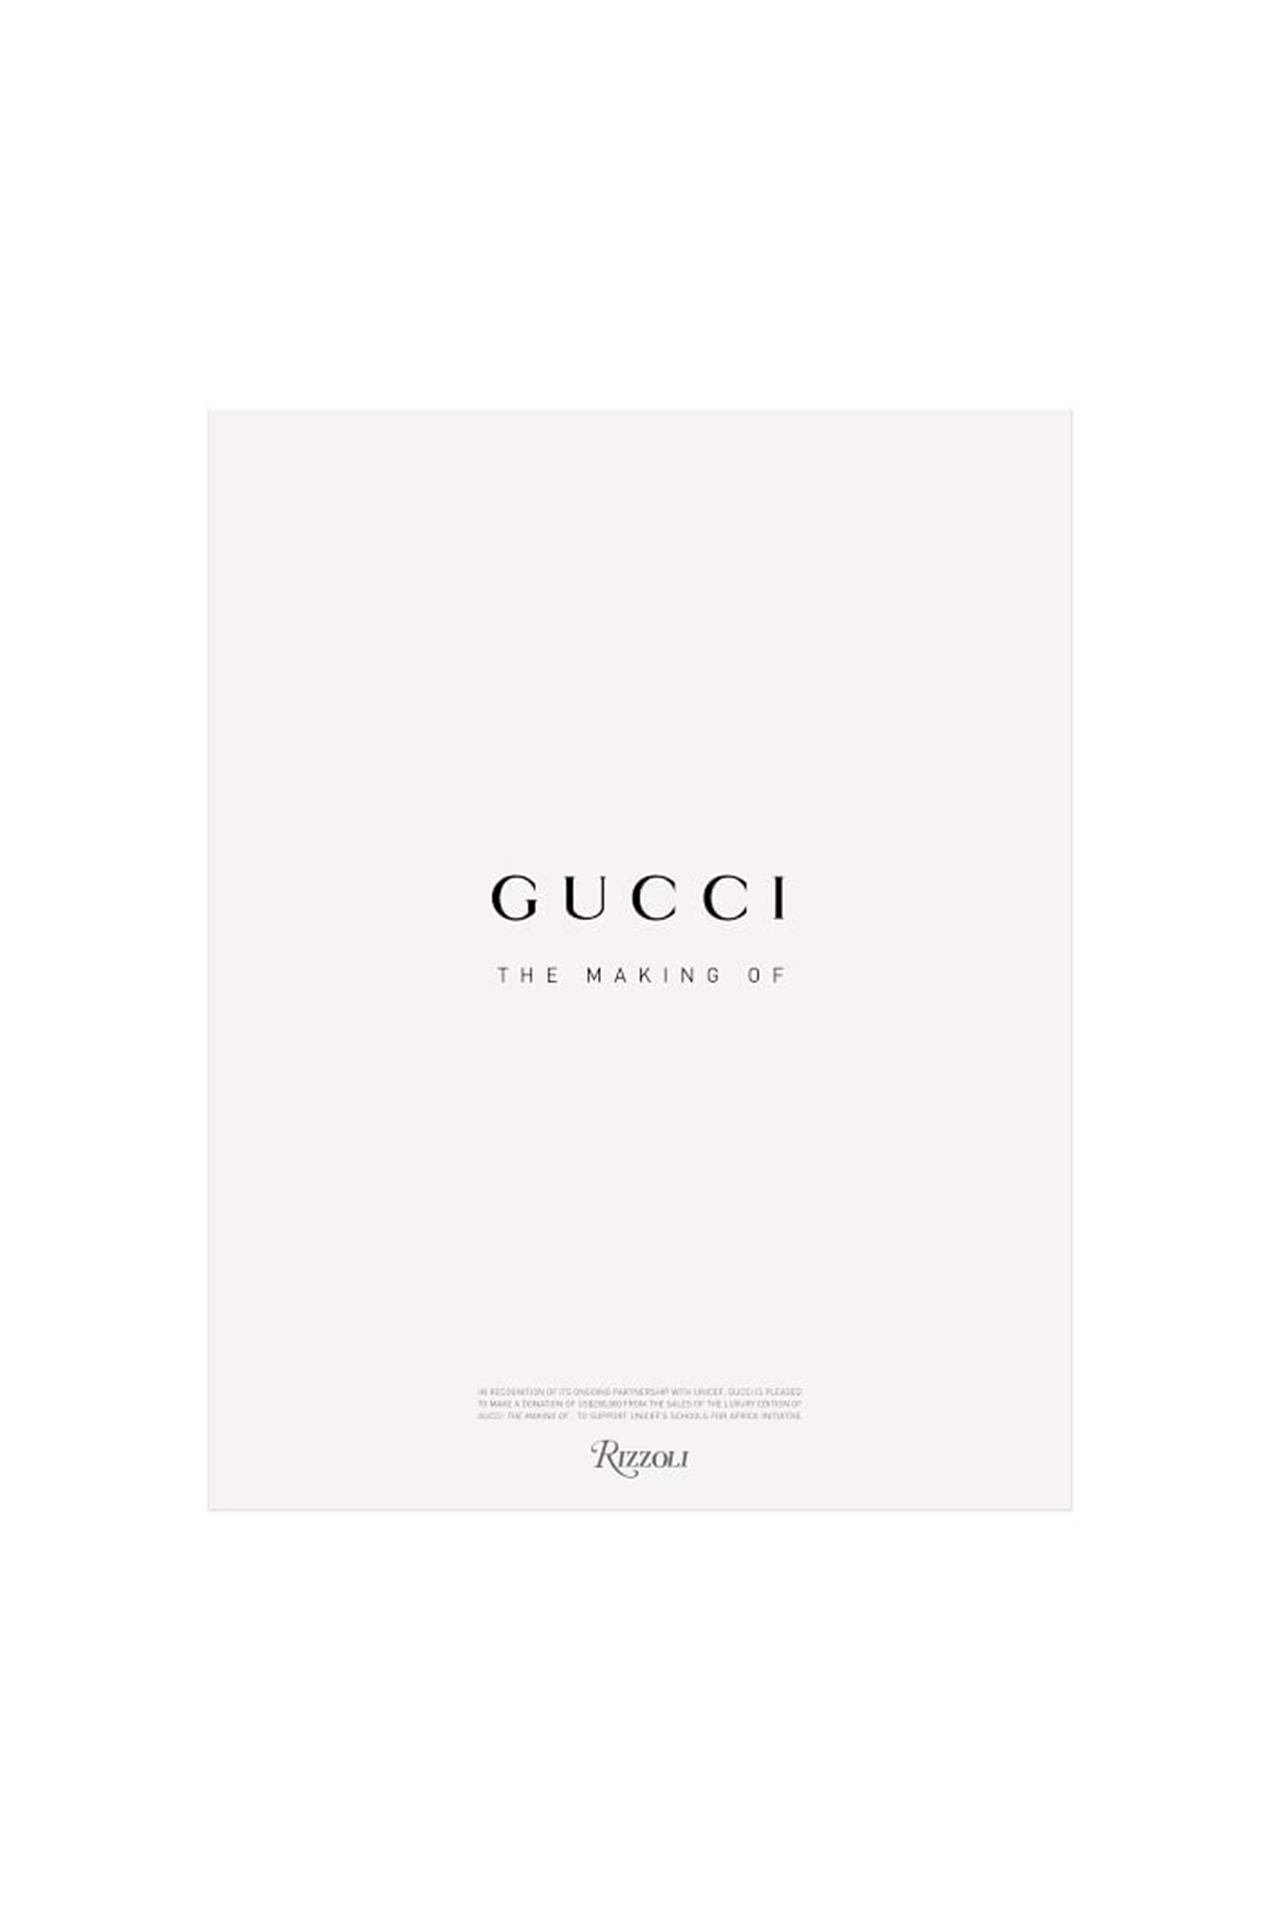 Gucci: The Making Of Book Back Cover Image (4623081963635)